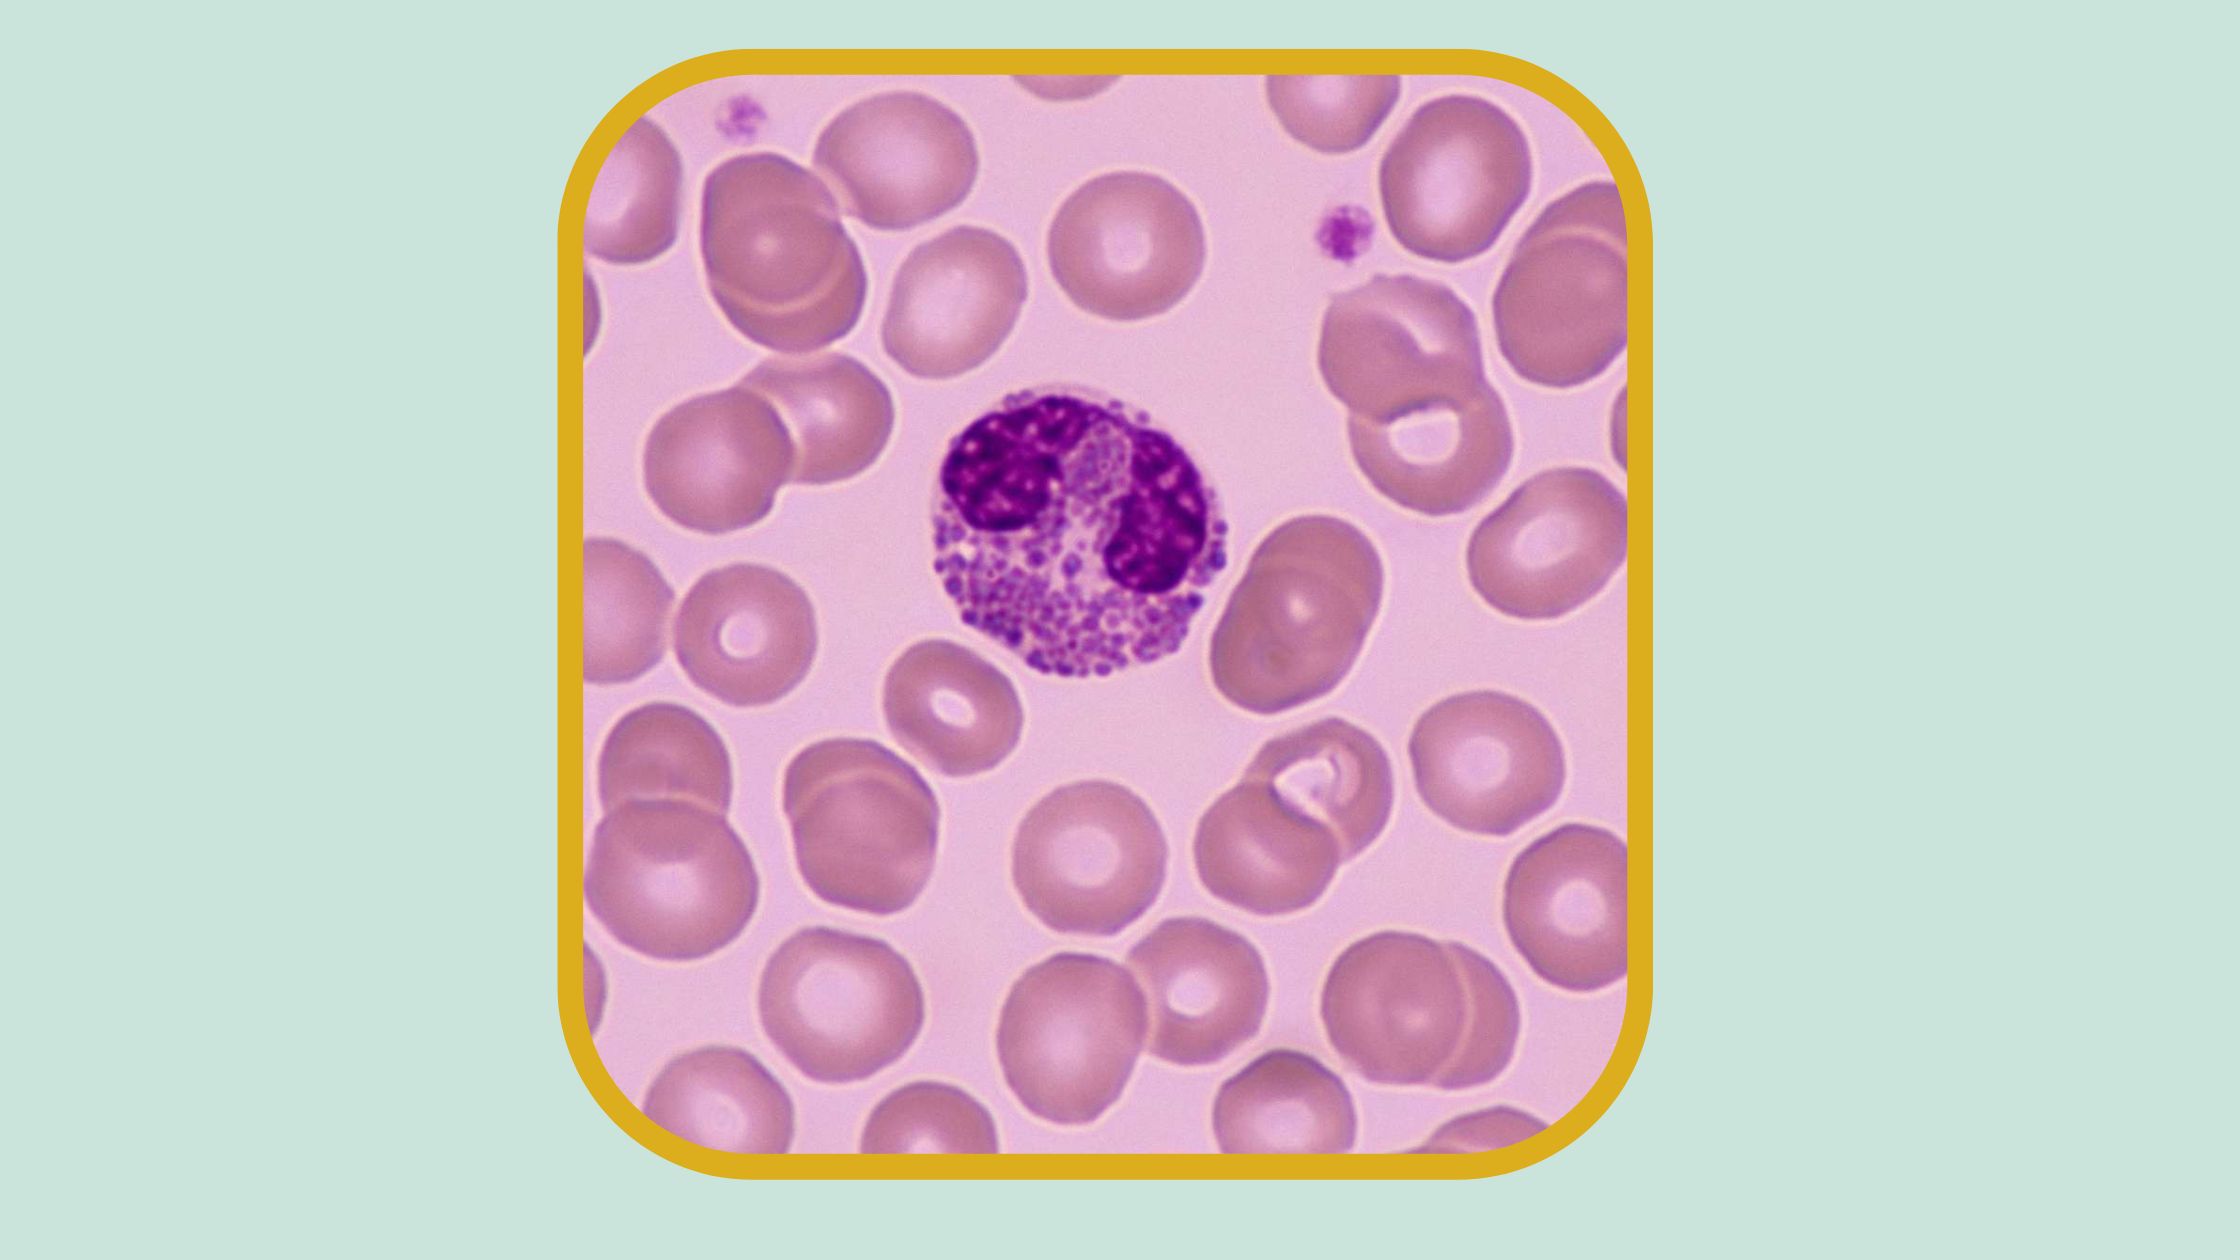 Facts about Eosinophils